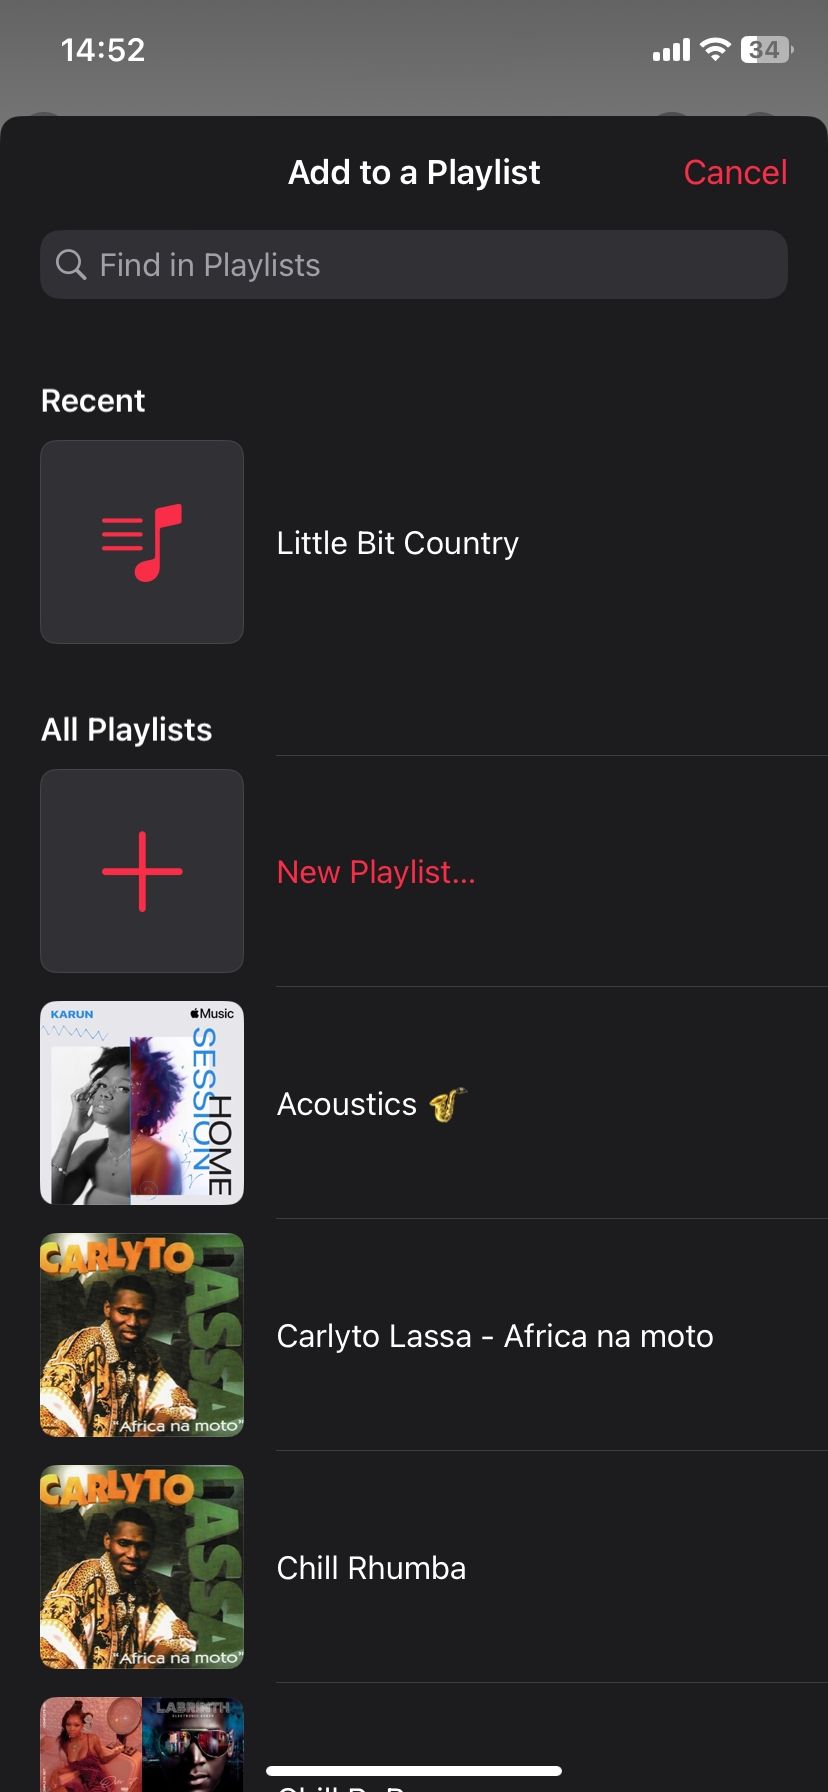 Adding songs from an Apple curated playlist to your Library